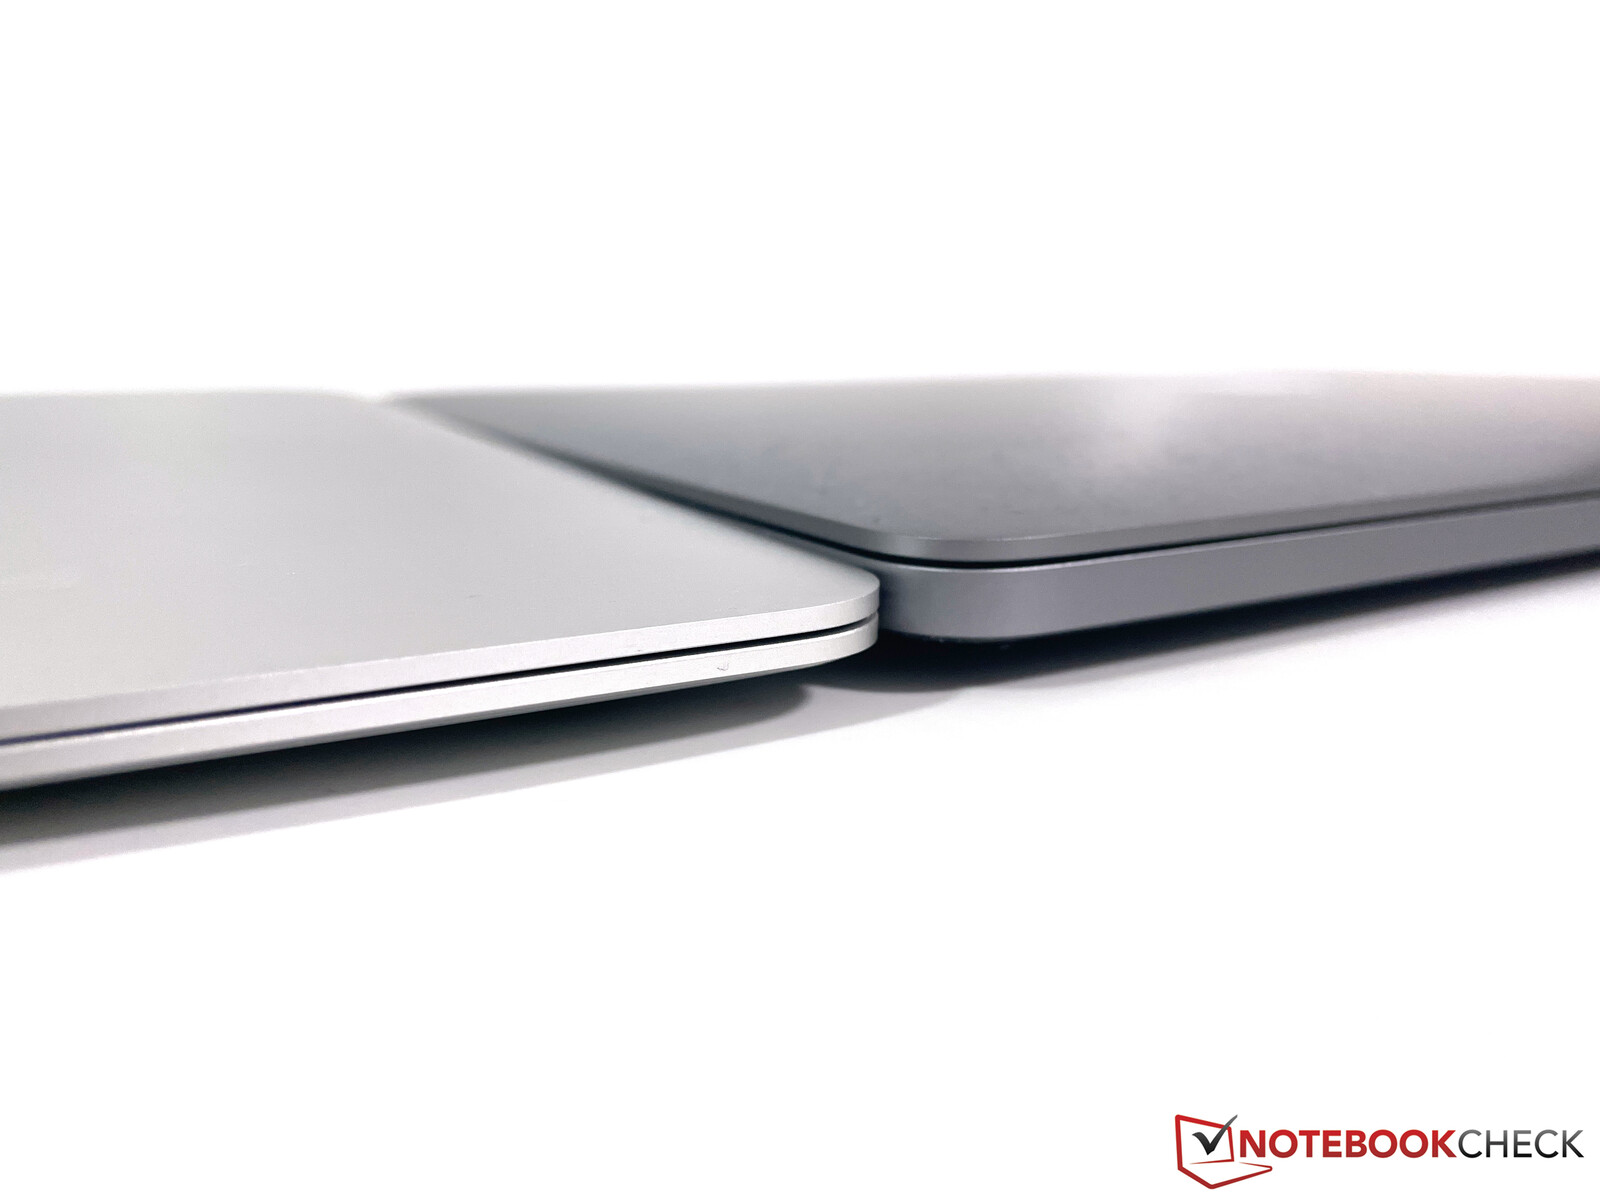 Apple MacBook Pro 13 2020 Laptop Review: The entry-level Pro also 